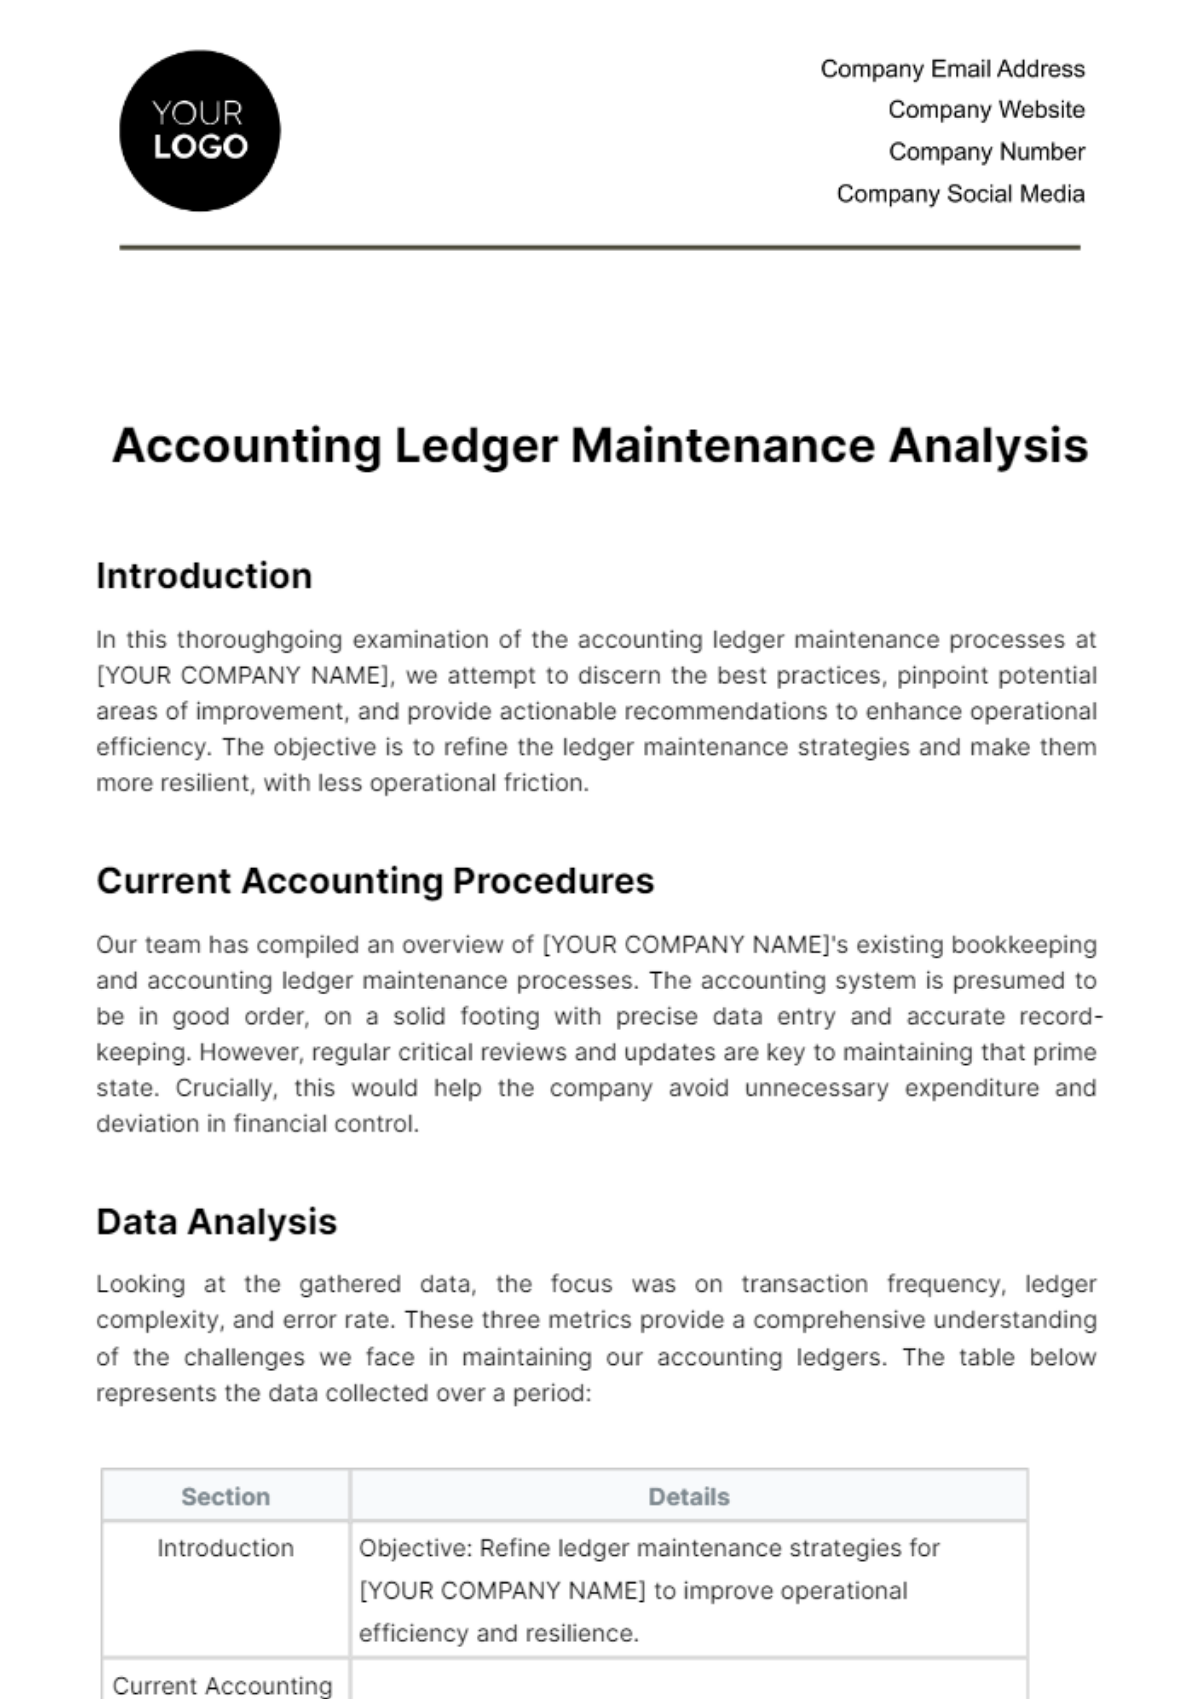 Free Accounting Ledger Maintenance Analysis Template